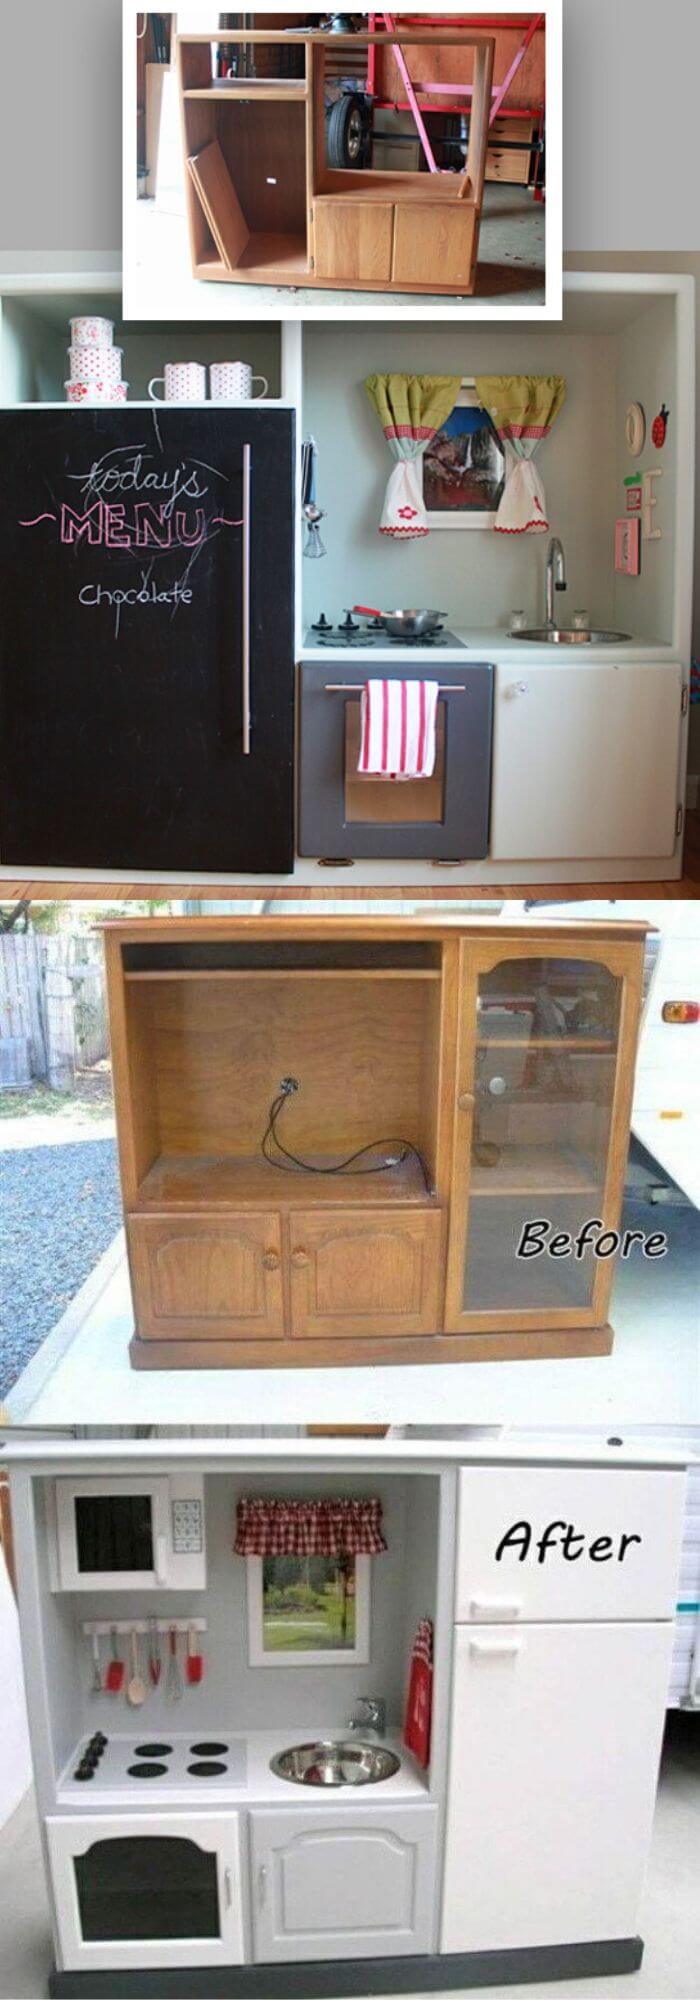 Transform an old entertainment center into a kid's dream play kitchen